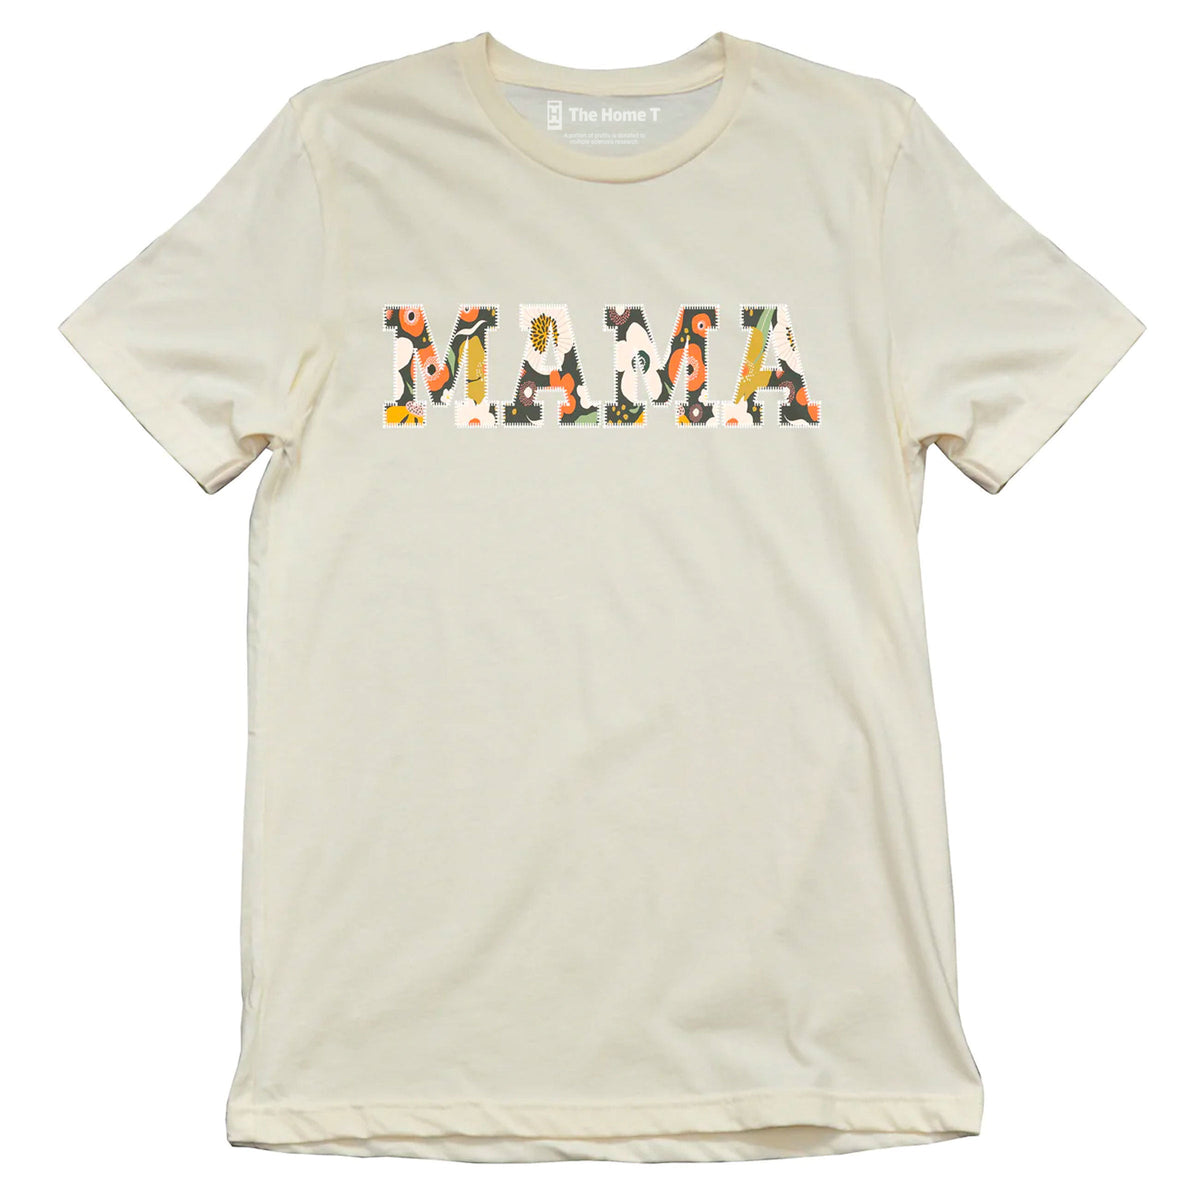 Mama Floral Stitched Letter